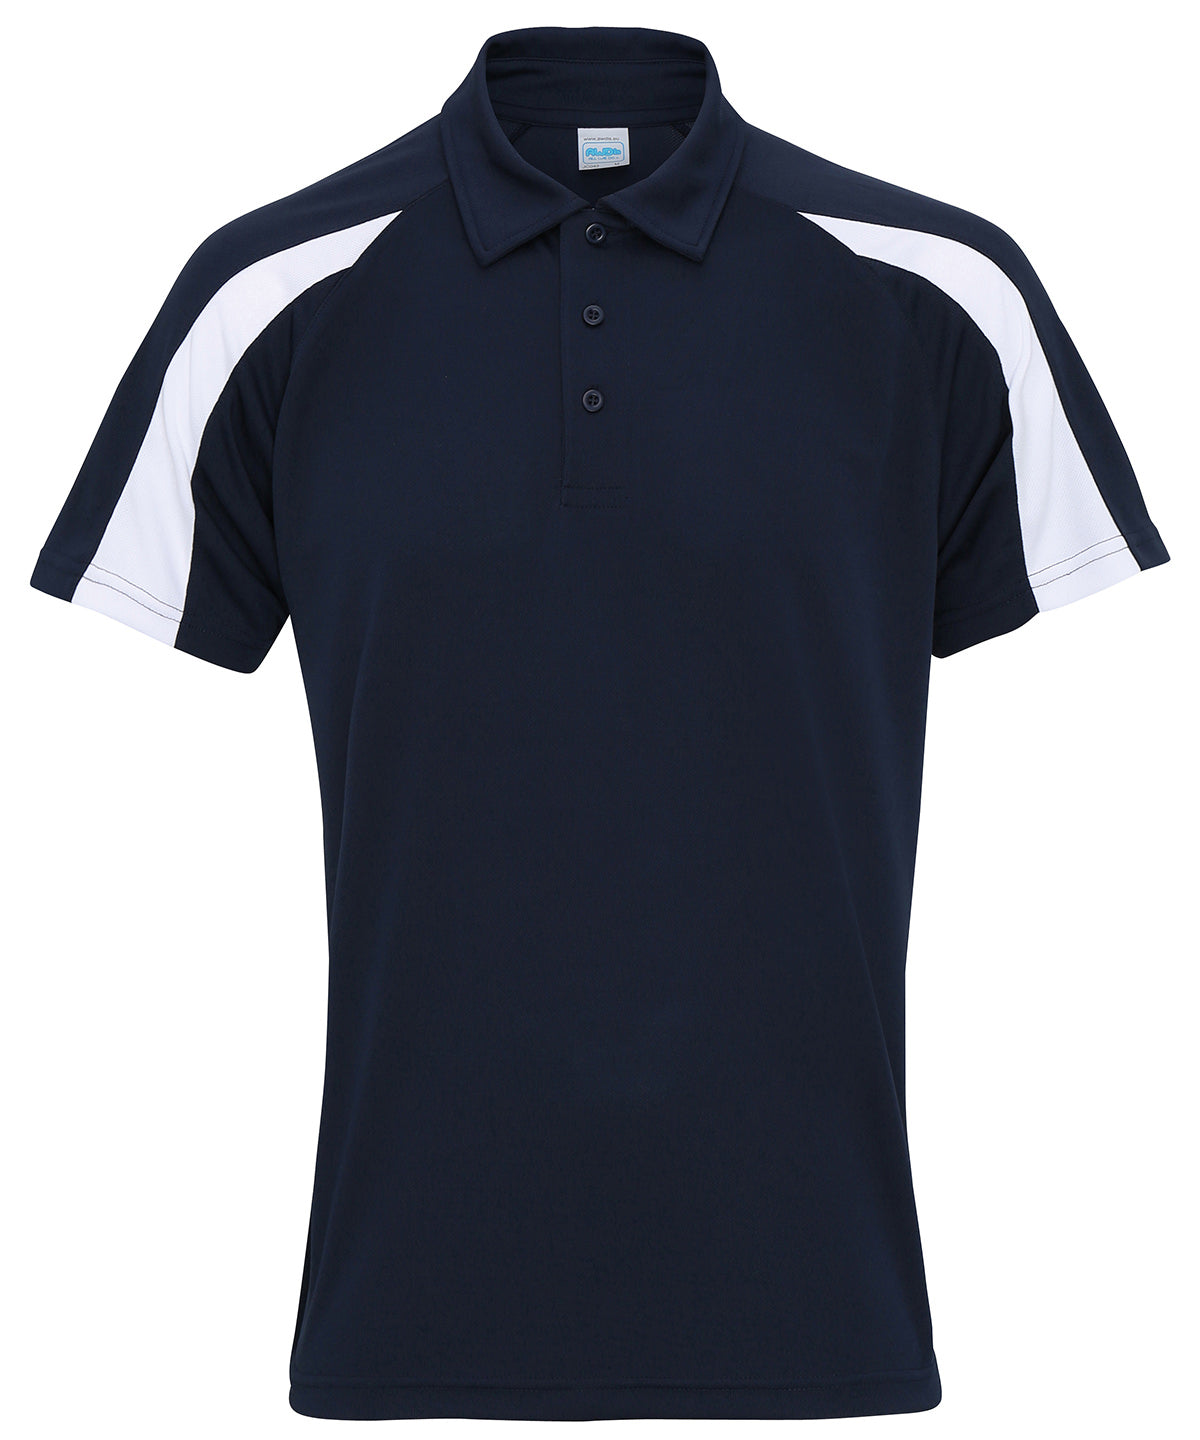 Personalised Polo Shirts - White AWDis Just Cool Contrast cool polo